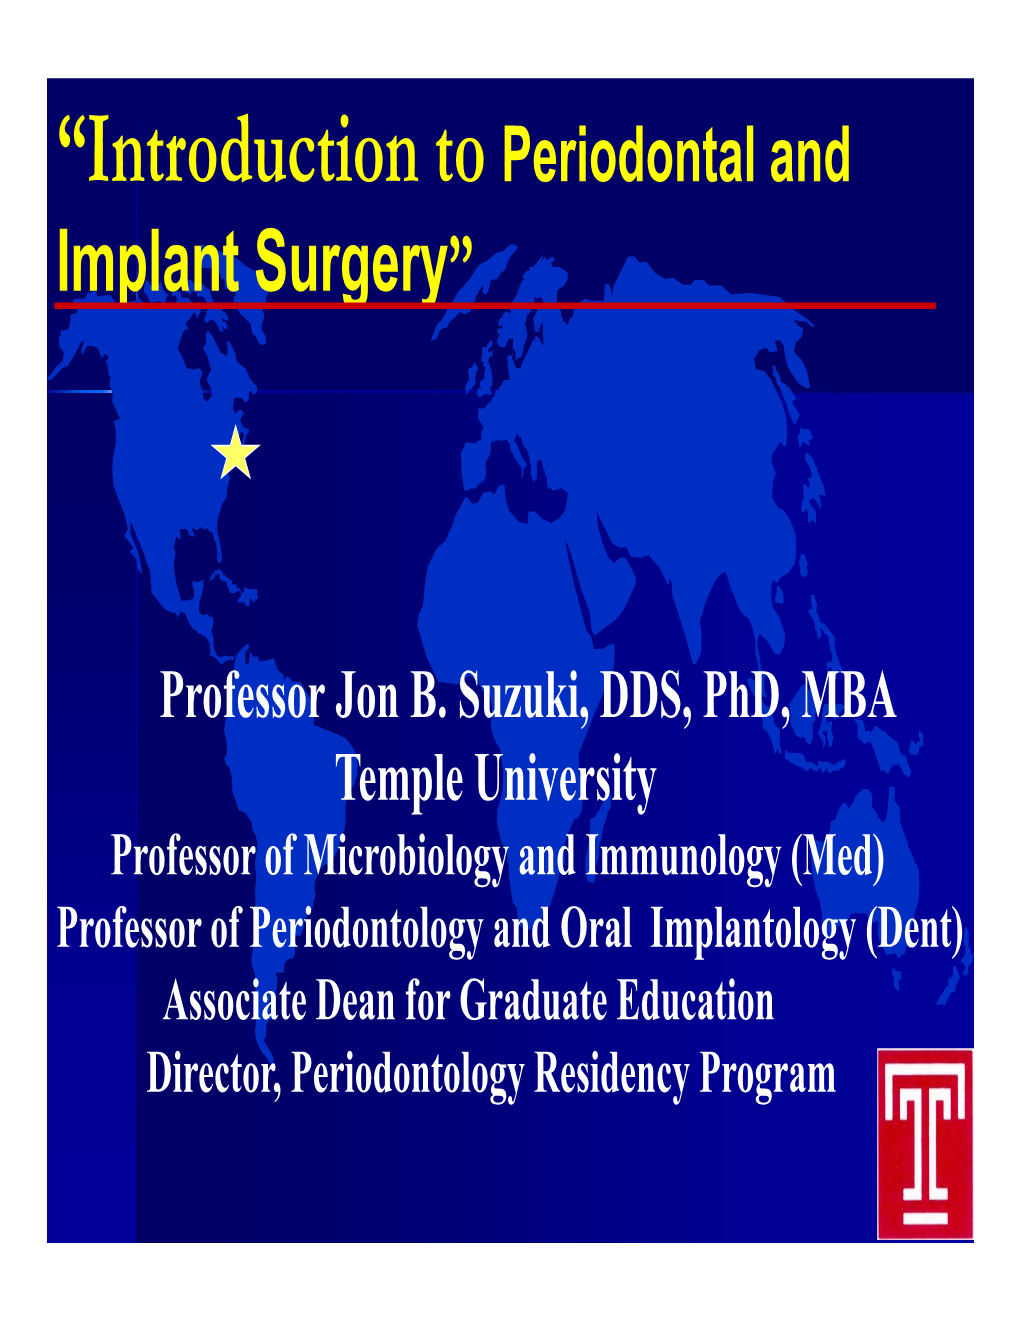 Introduction to Periodontal and Implant Surgery”